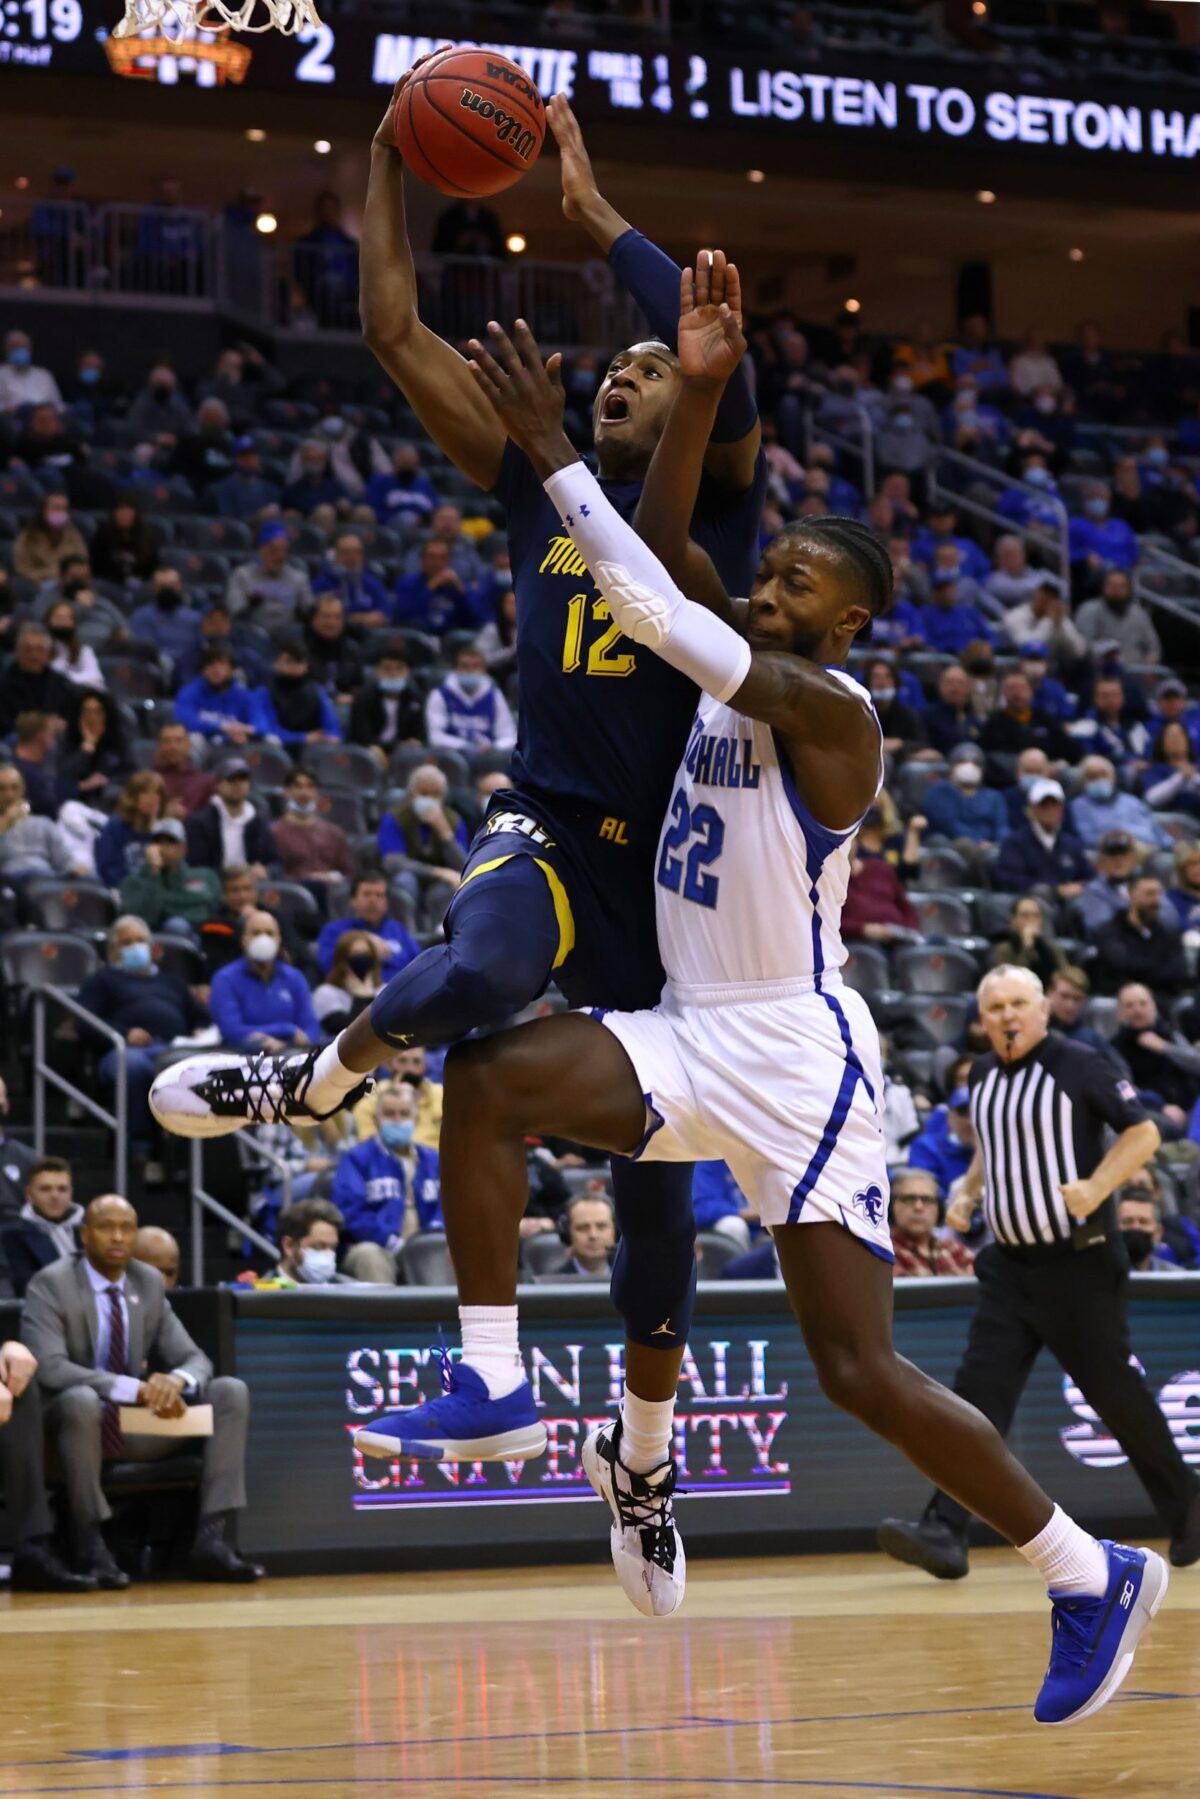 Olivier-Maxence Prosper #12 of the Marquette Golden Eagles attempts a shot as Myles Cale #22 of the Seton Hall Pirates defends during the first half of a game at Prudential Center in Newark, N.J., on Jan. 26, 2022. (Rich Schultz/Getty Images)